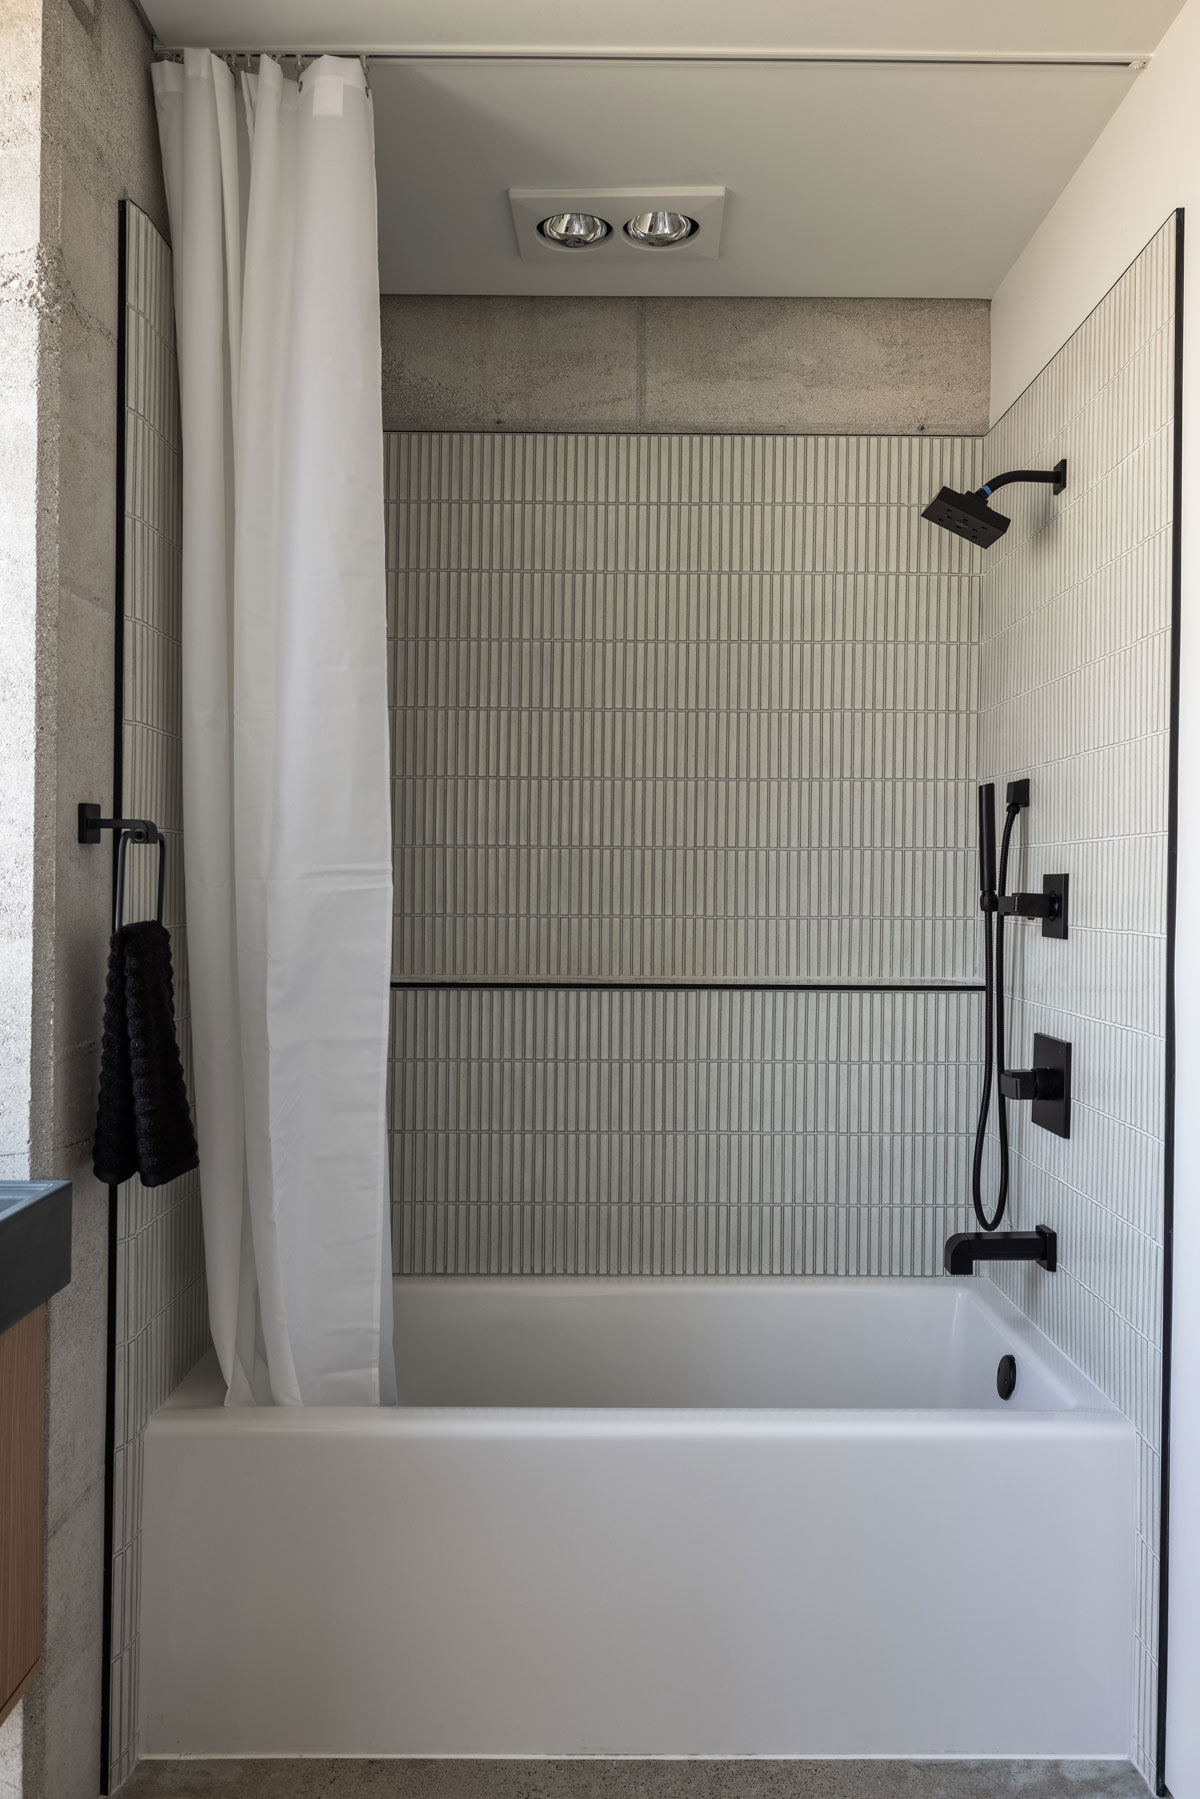 Japanese tile, matte black plumbing fixtures, and rammed earth converge in unity in this modern bathroom